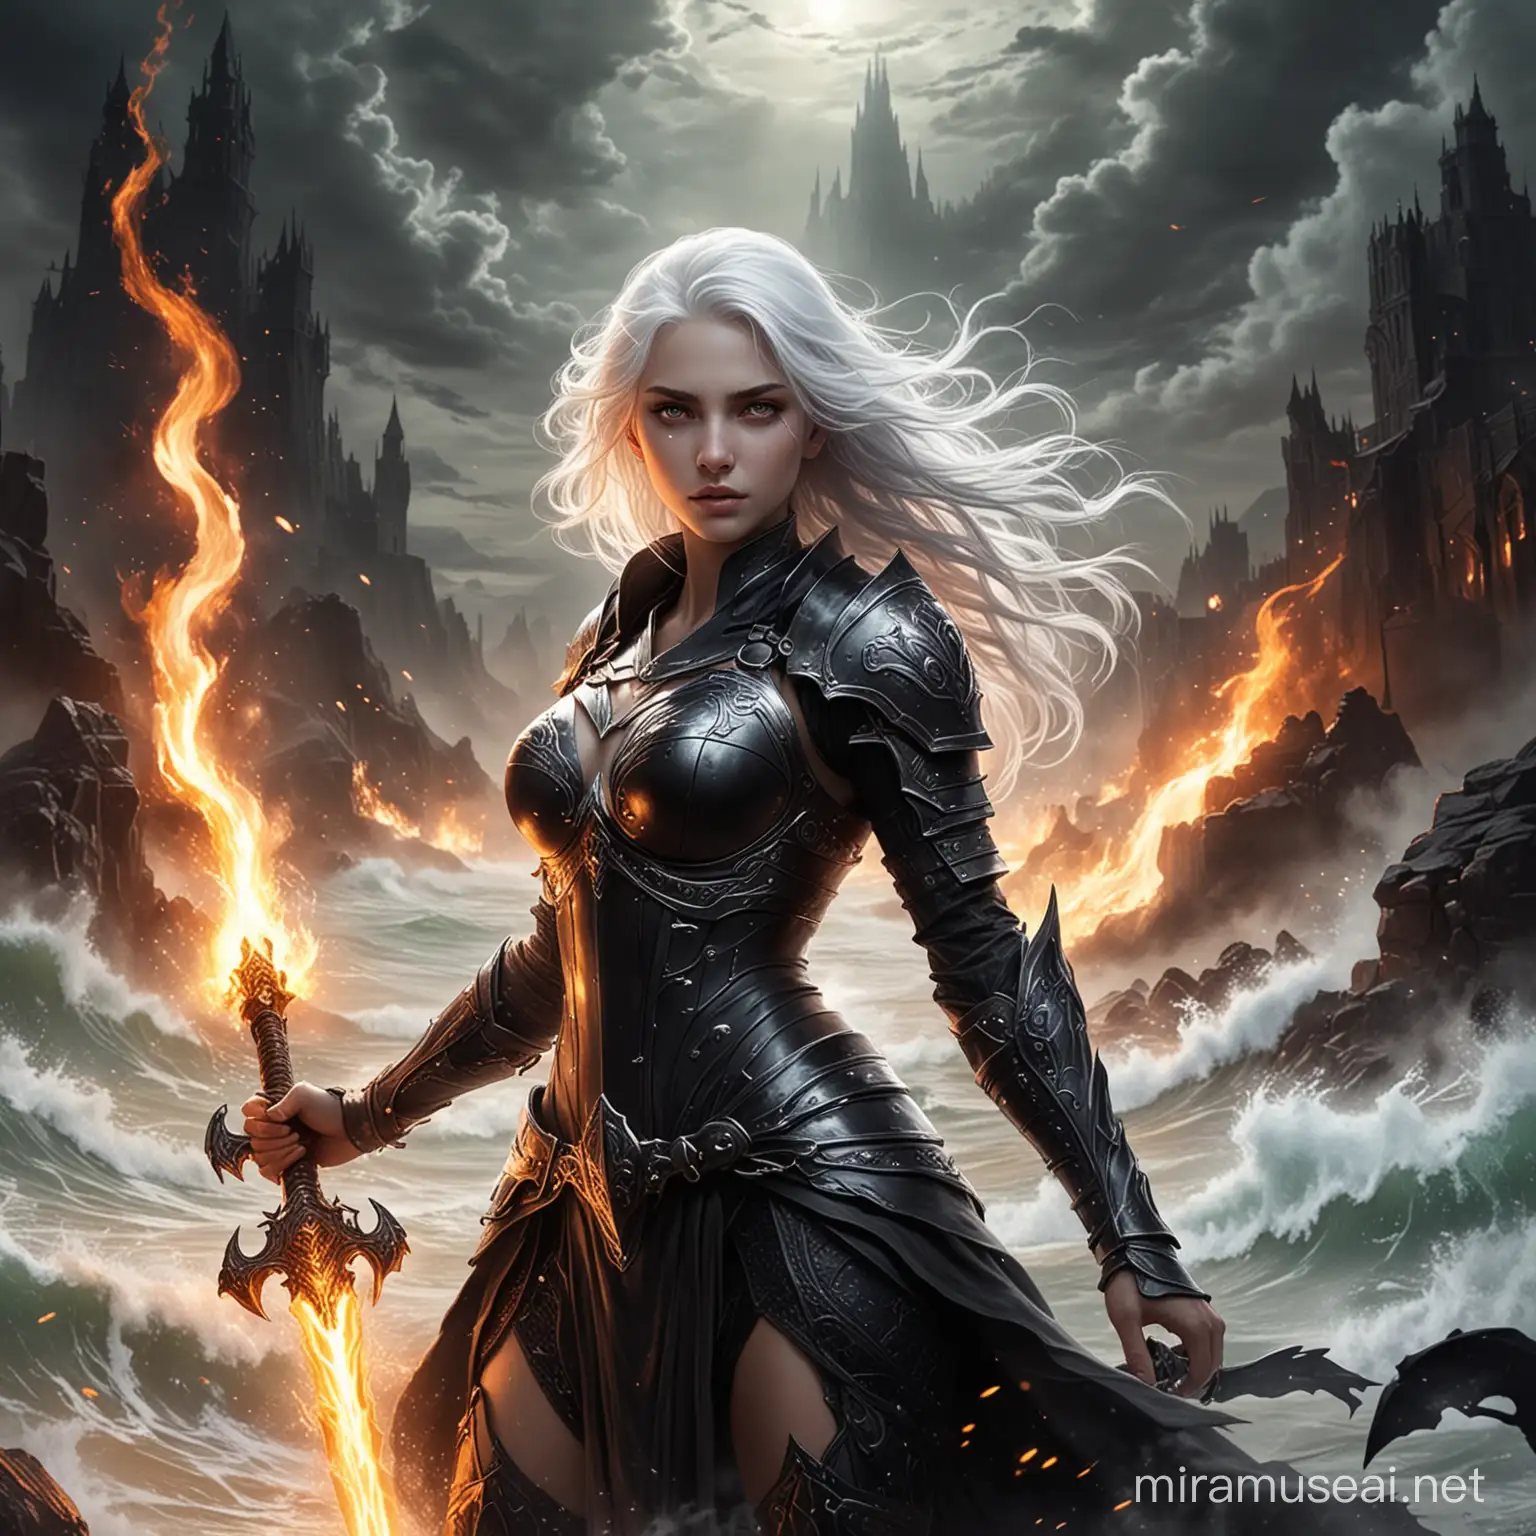 on a fieey battlefield of demons and monster, a young girl foght against an endless tides of monster. The young girl controlled white flames with magic. she controlled the fire and absorbed into her radiant figure. she was a tall, slender girl, with clear grey eyes and a detached look on her face. She had silver-white hair that fell to her back.  She was clad in black armor, wielding a blade and wreathed in blinding white flames. she unleashed her flames that had wrapped tightly around her armor and compressed into a furious mass of incinerating white radiance was blew outwards killing all


